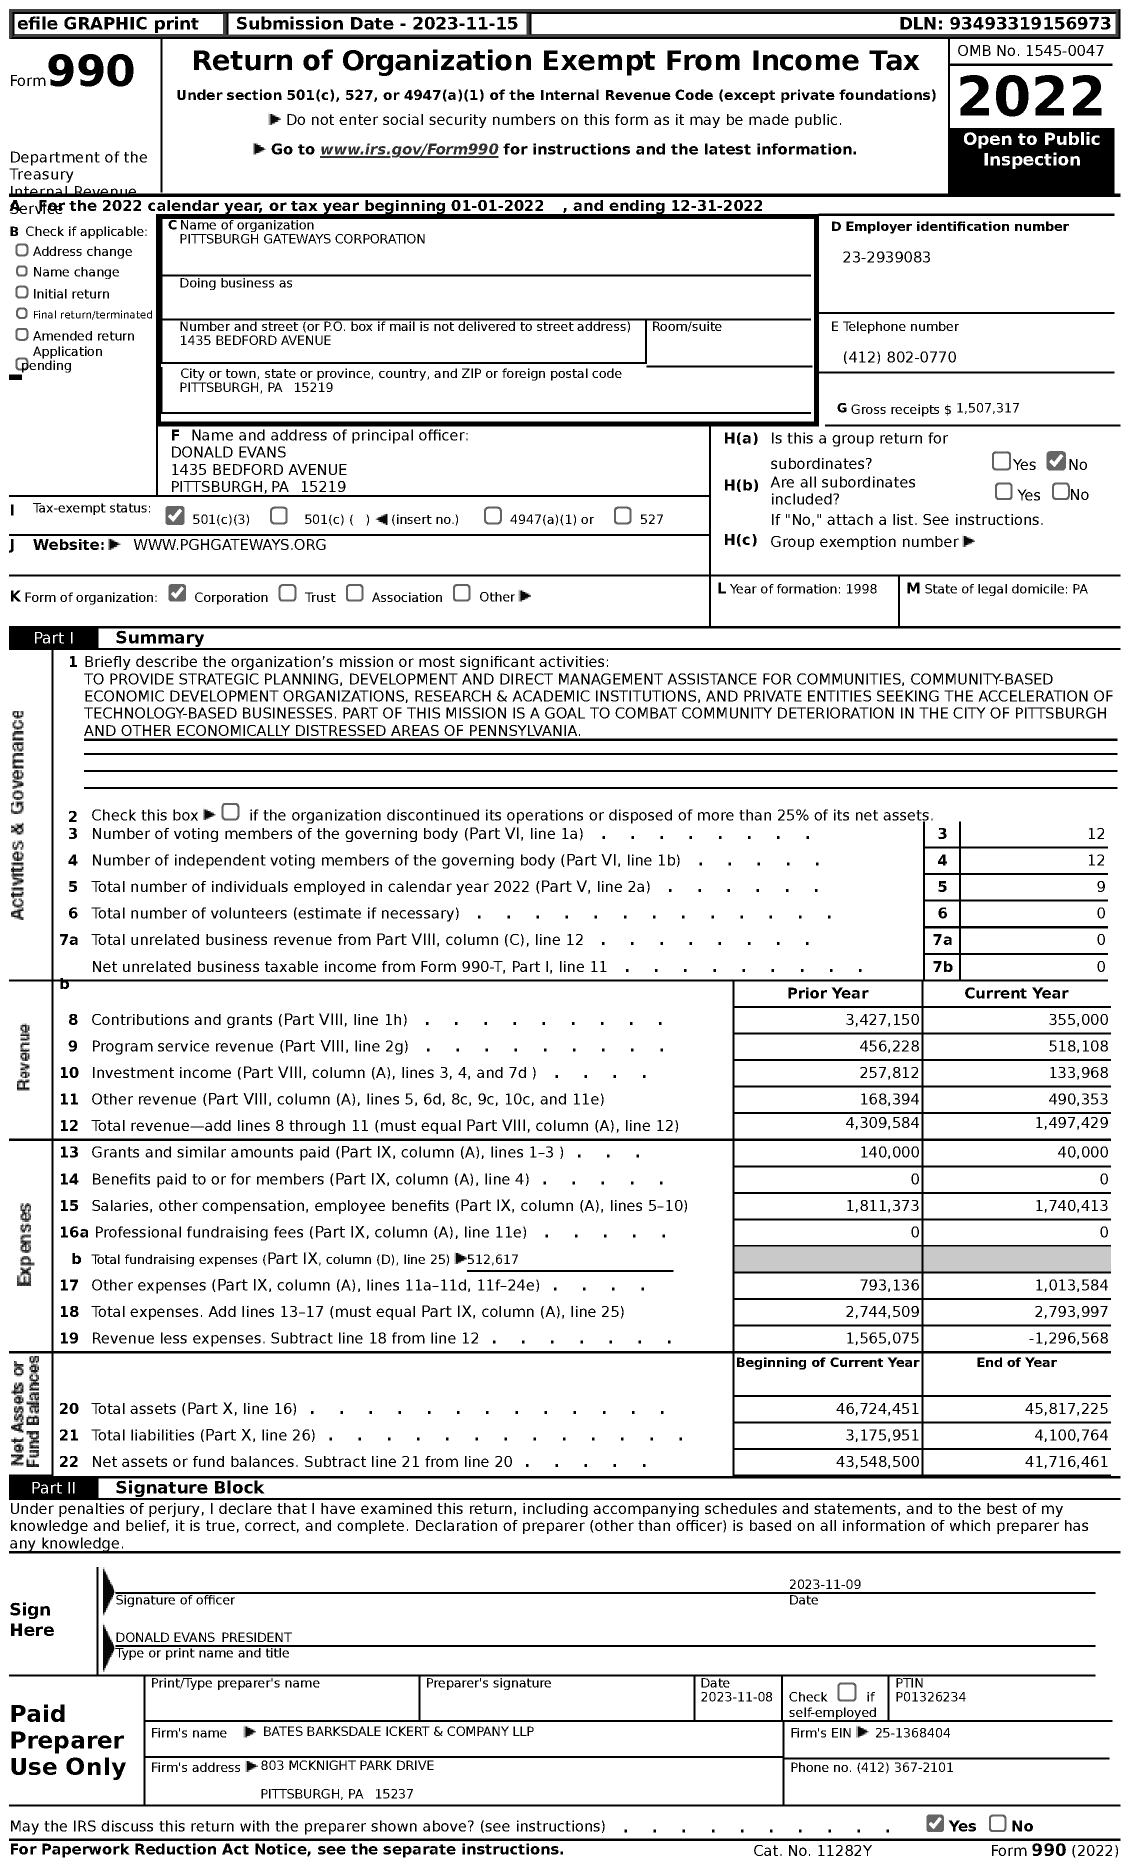 Image of first page of 2022 Form 990 for Pittsburgh Gateways Corporation